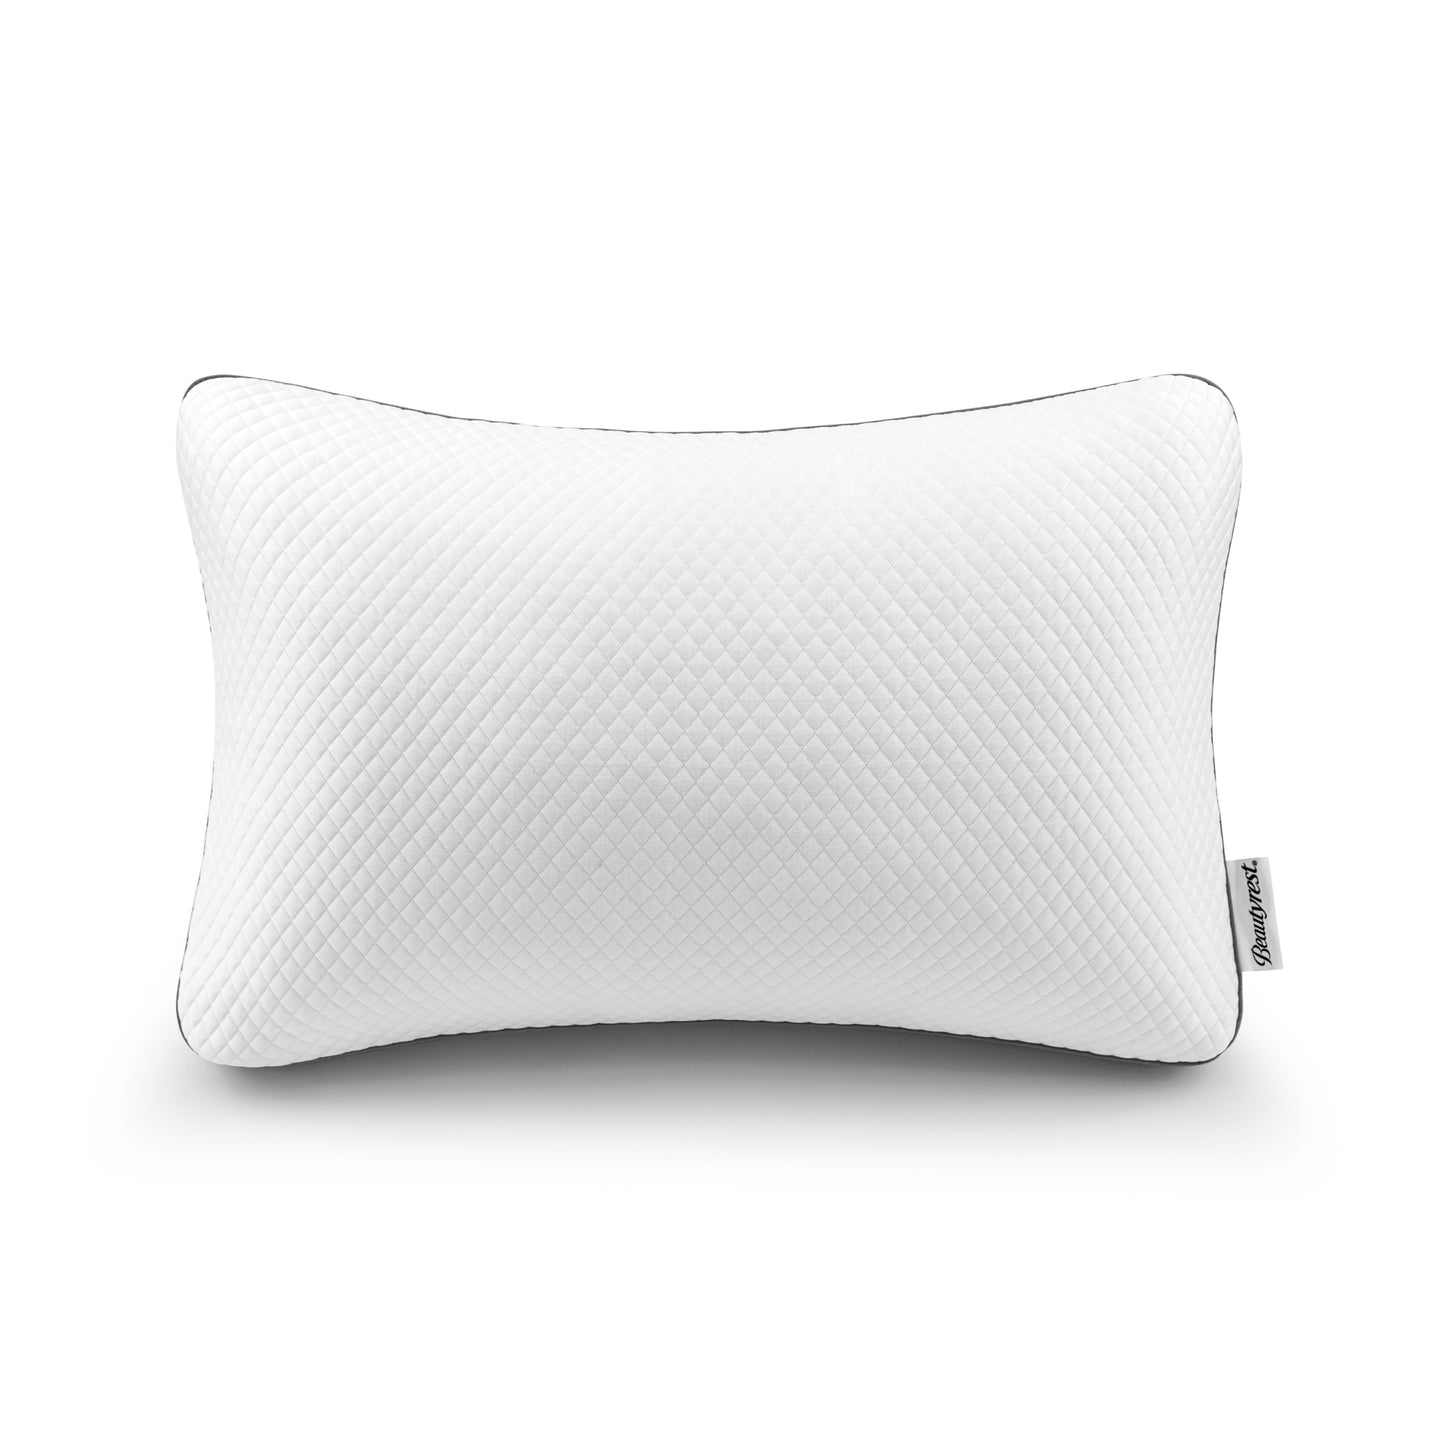 Beautyrest Absolute Relaxation Pillow Top View